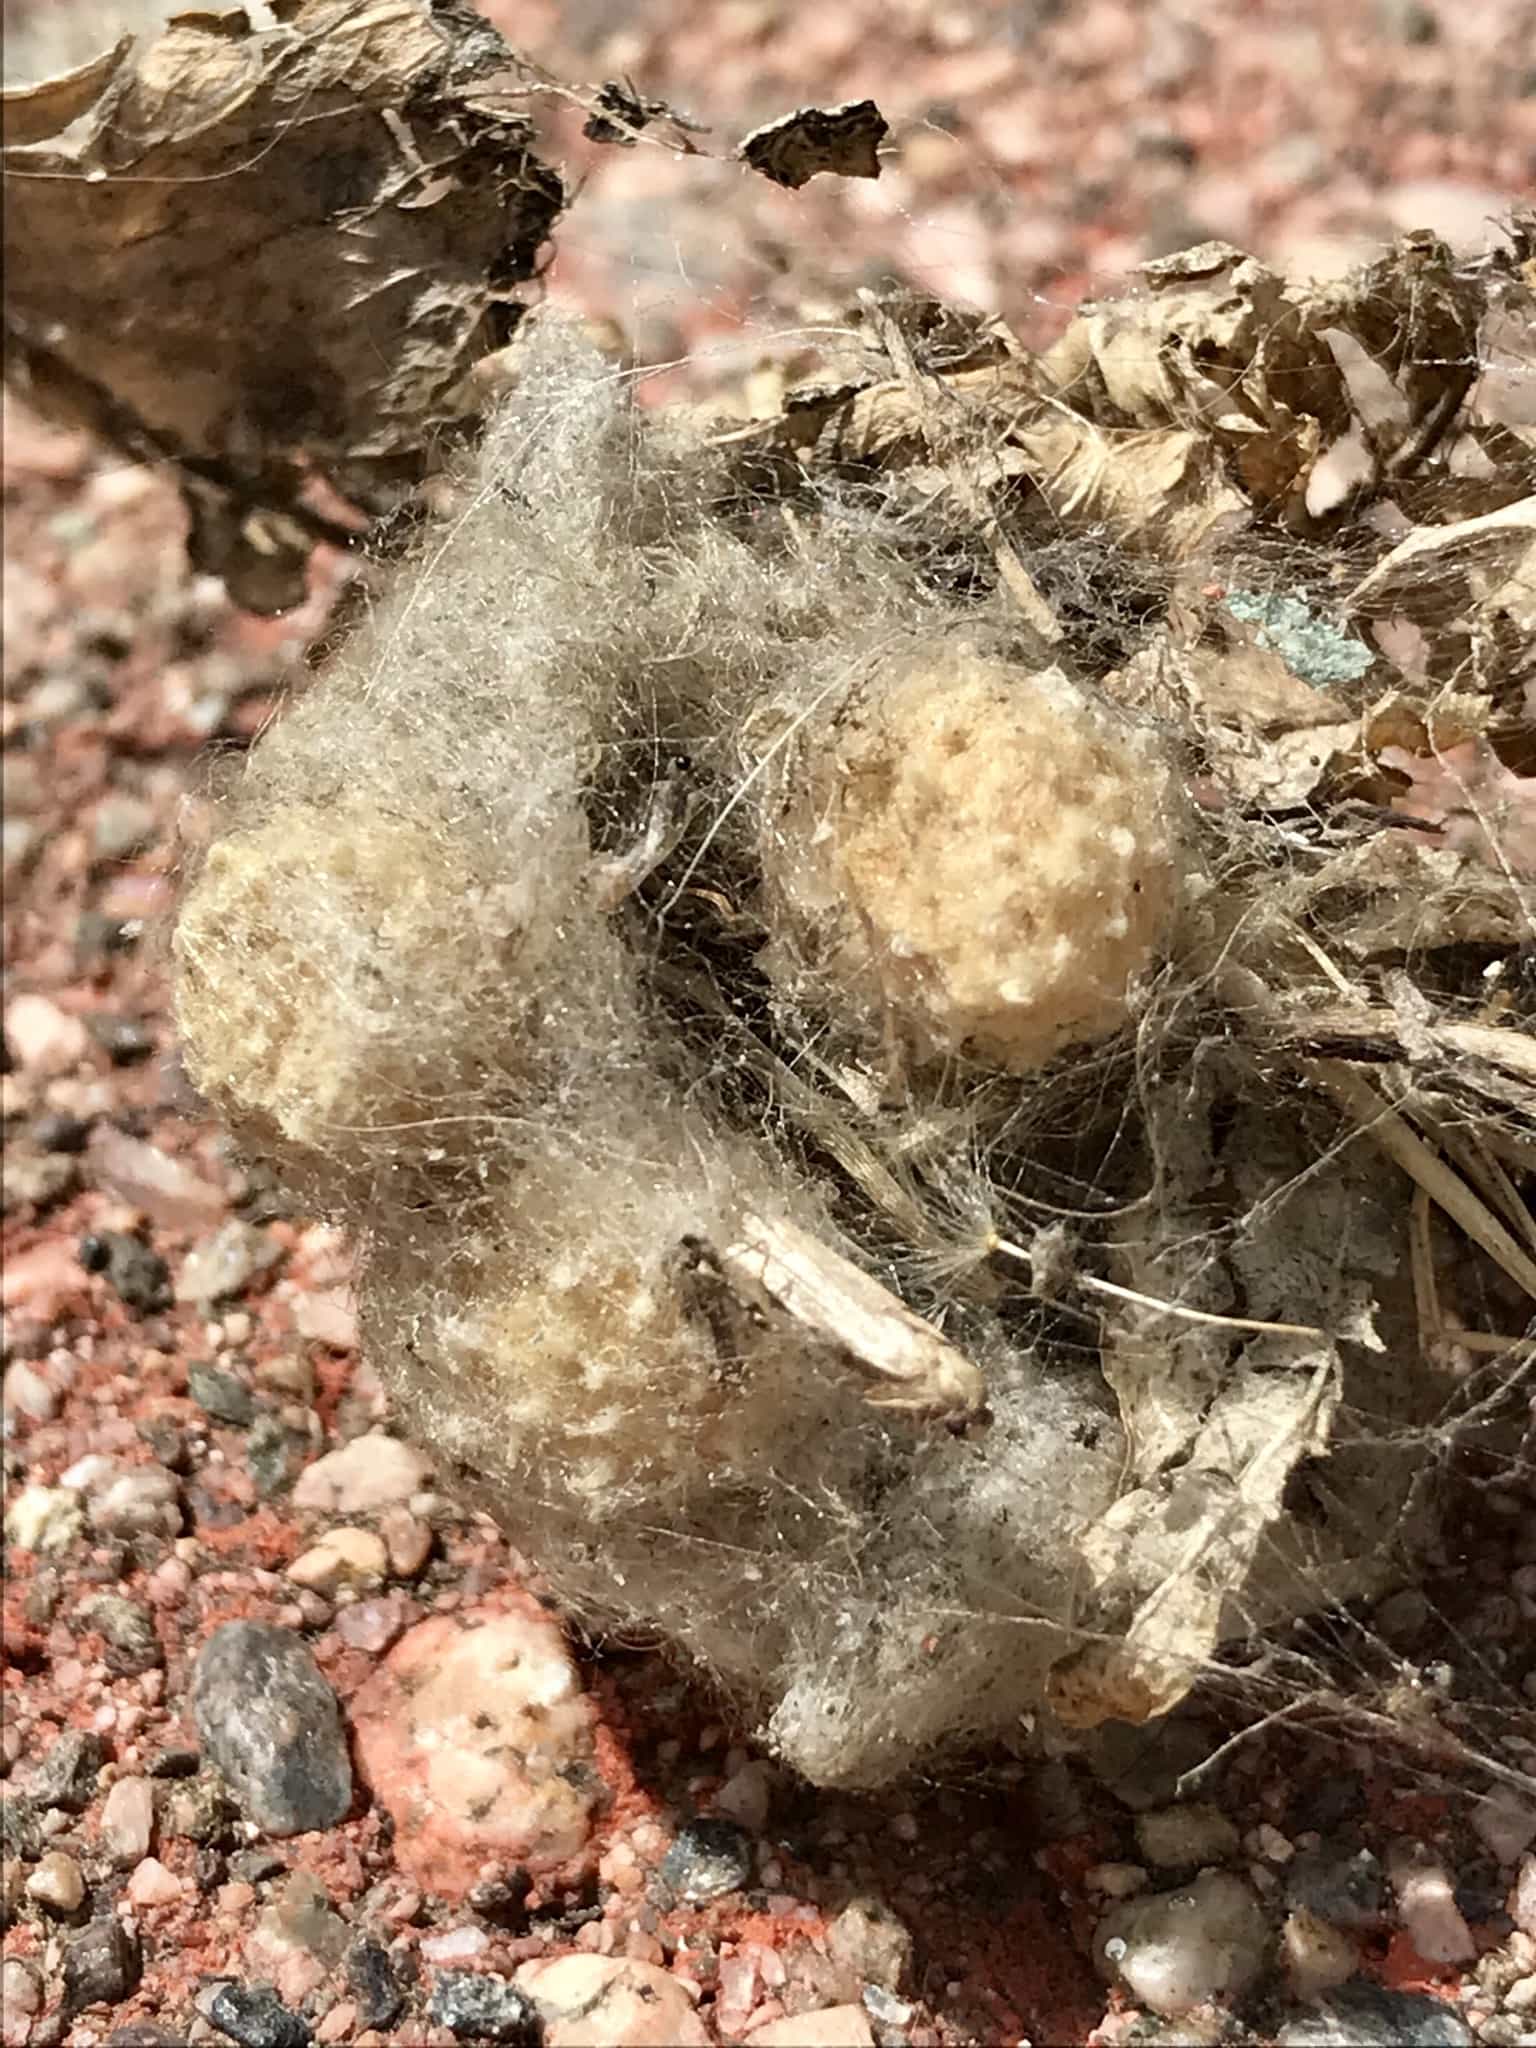 Picture of Latrodectus geometricus (Brown Widow Spider) - Egg sacs